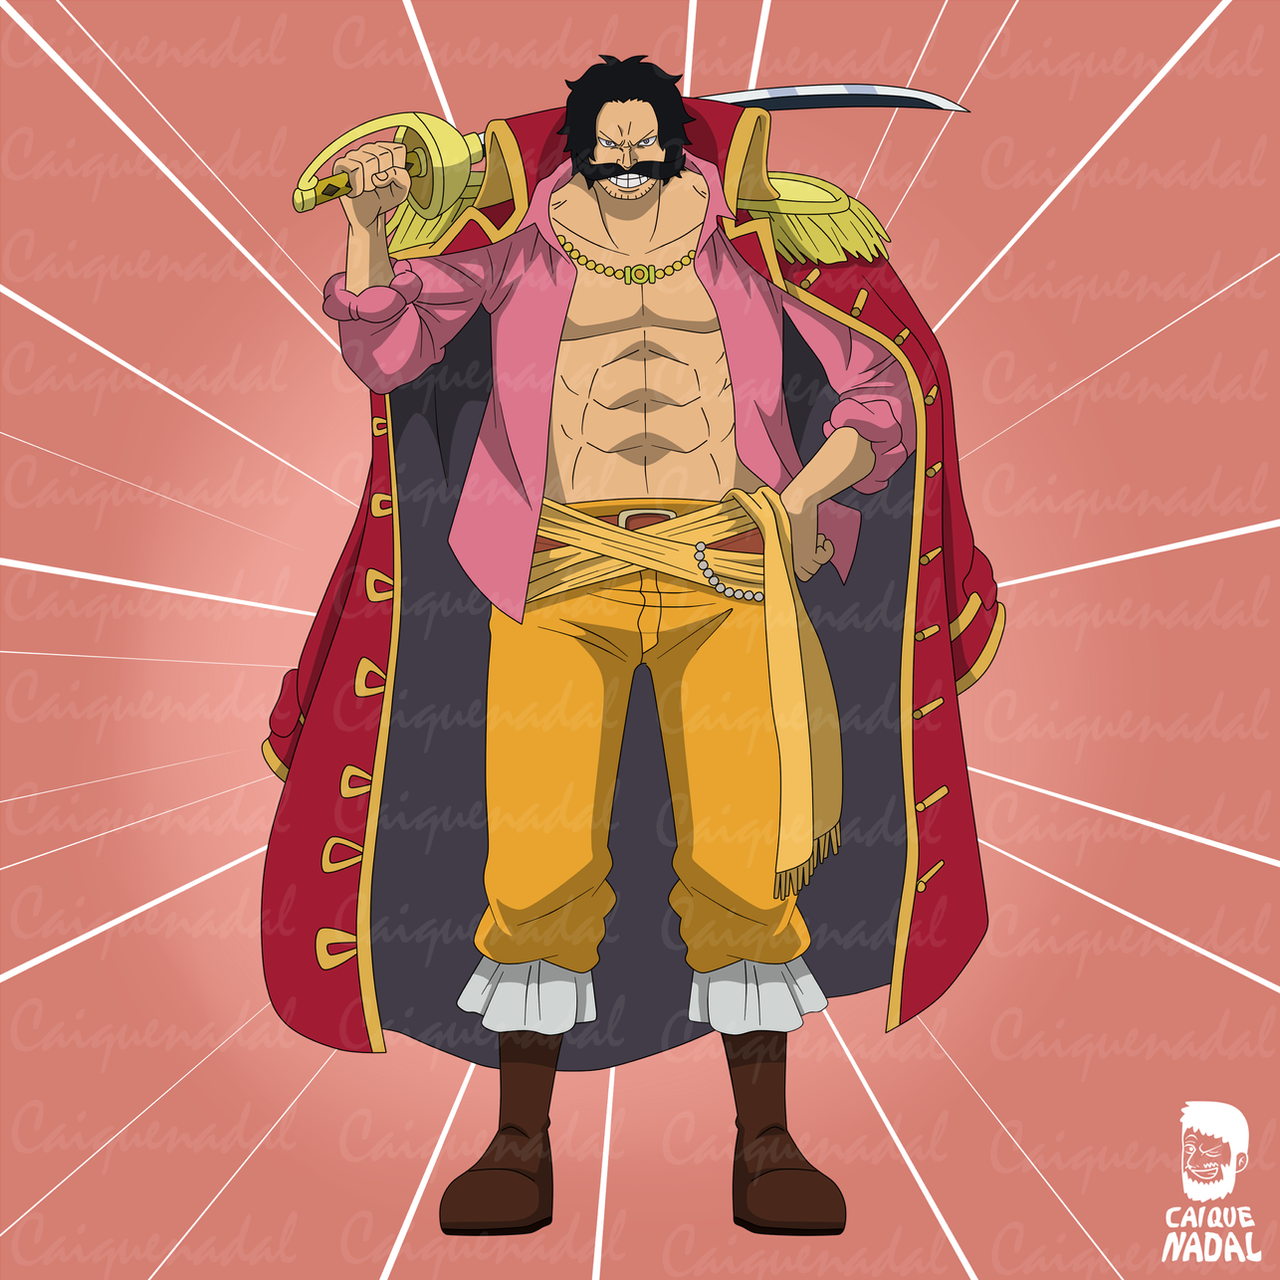 Gold D. Roger one piece pirate king